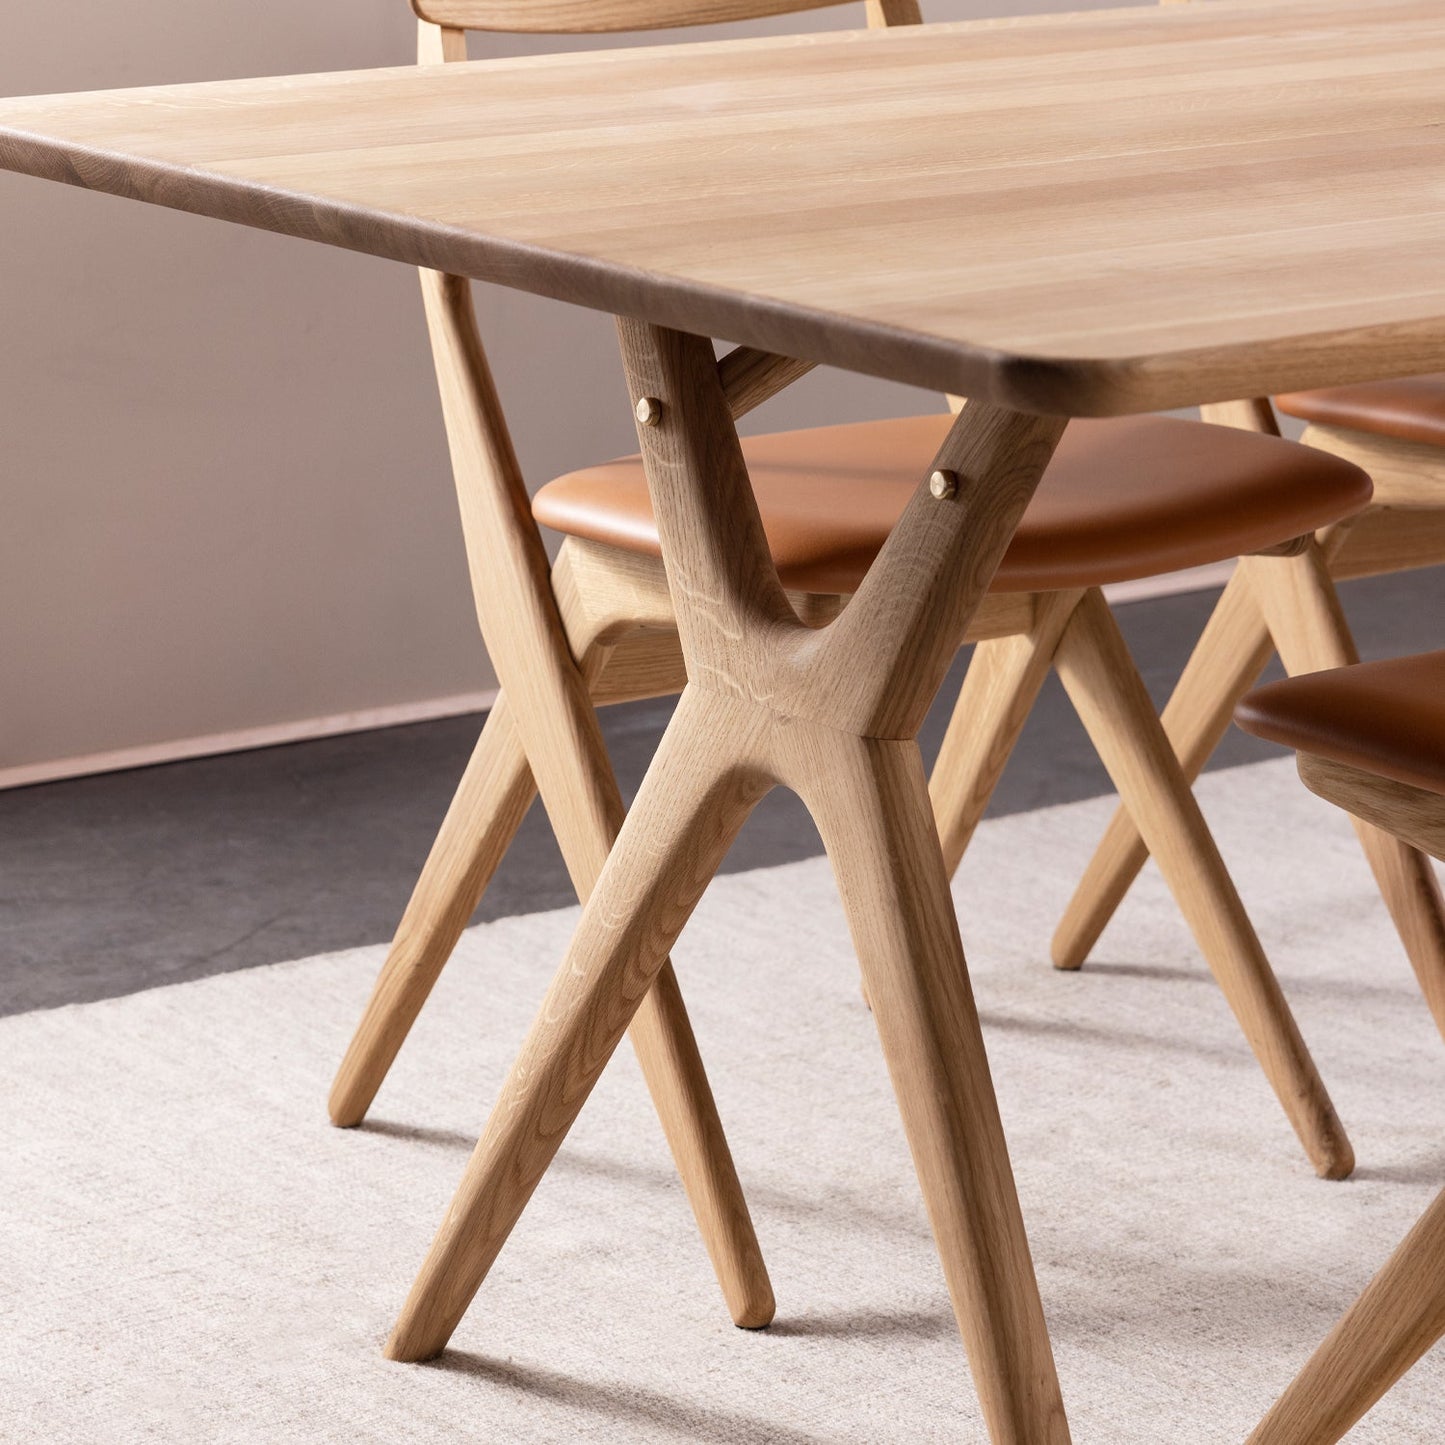 Rose Hill Oak Dining Table With Rounded Corners With Brass - 260cm Extending